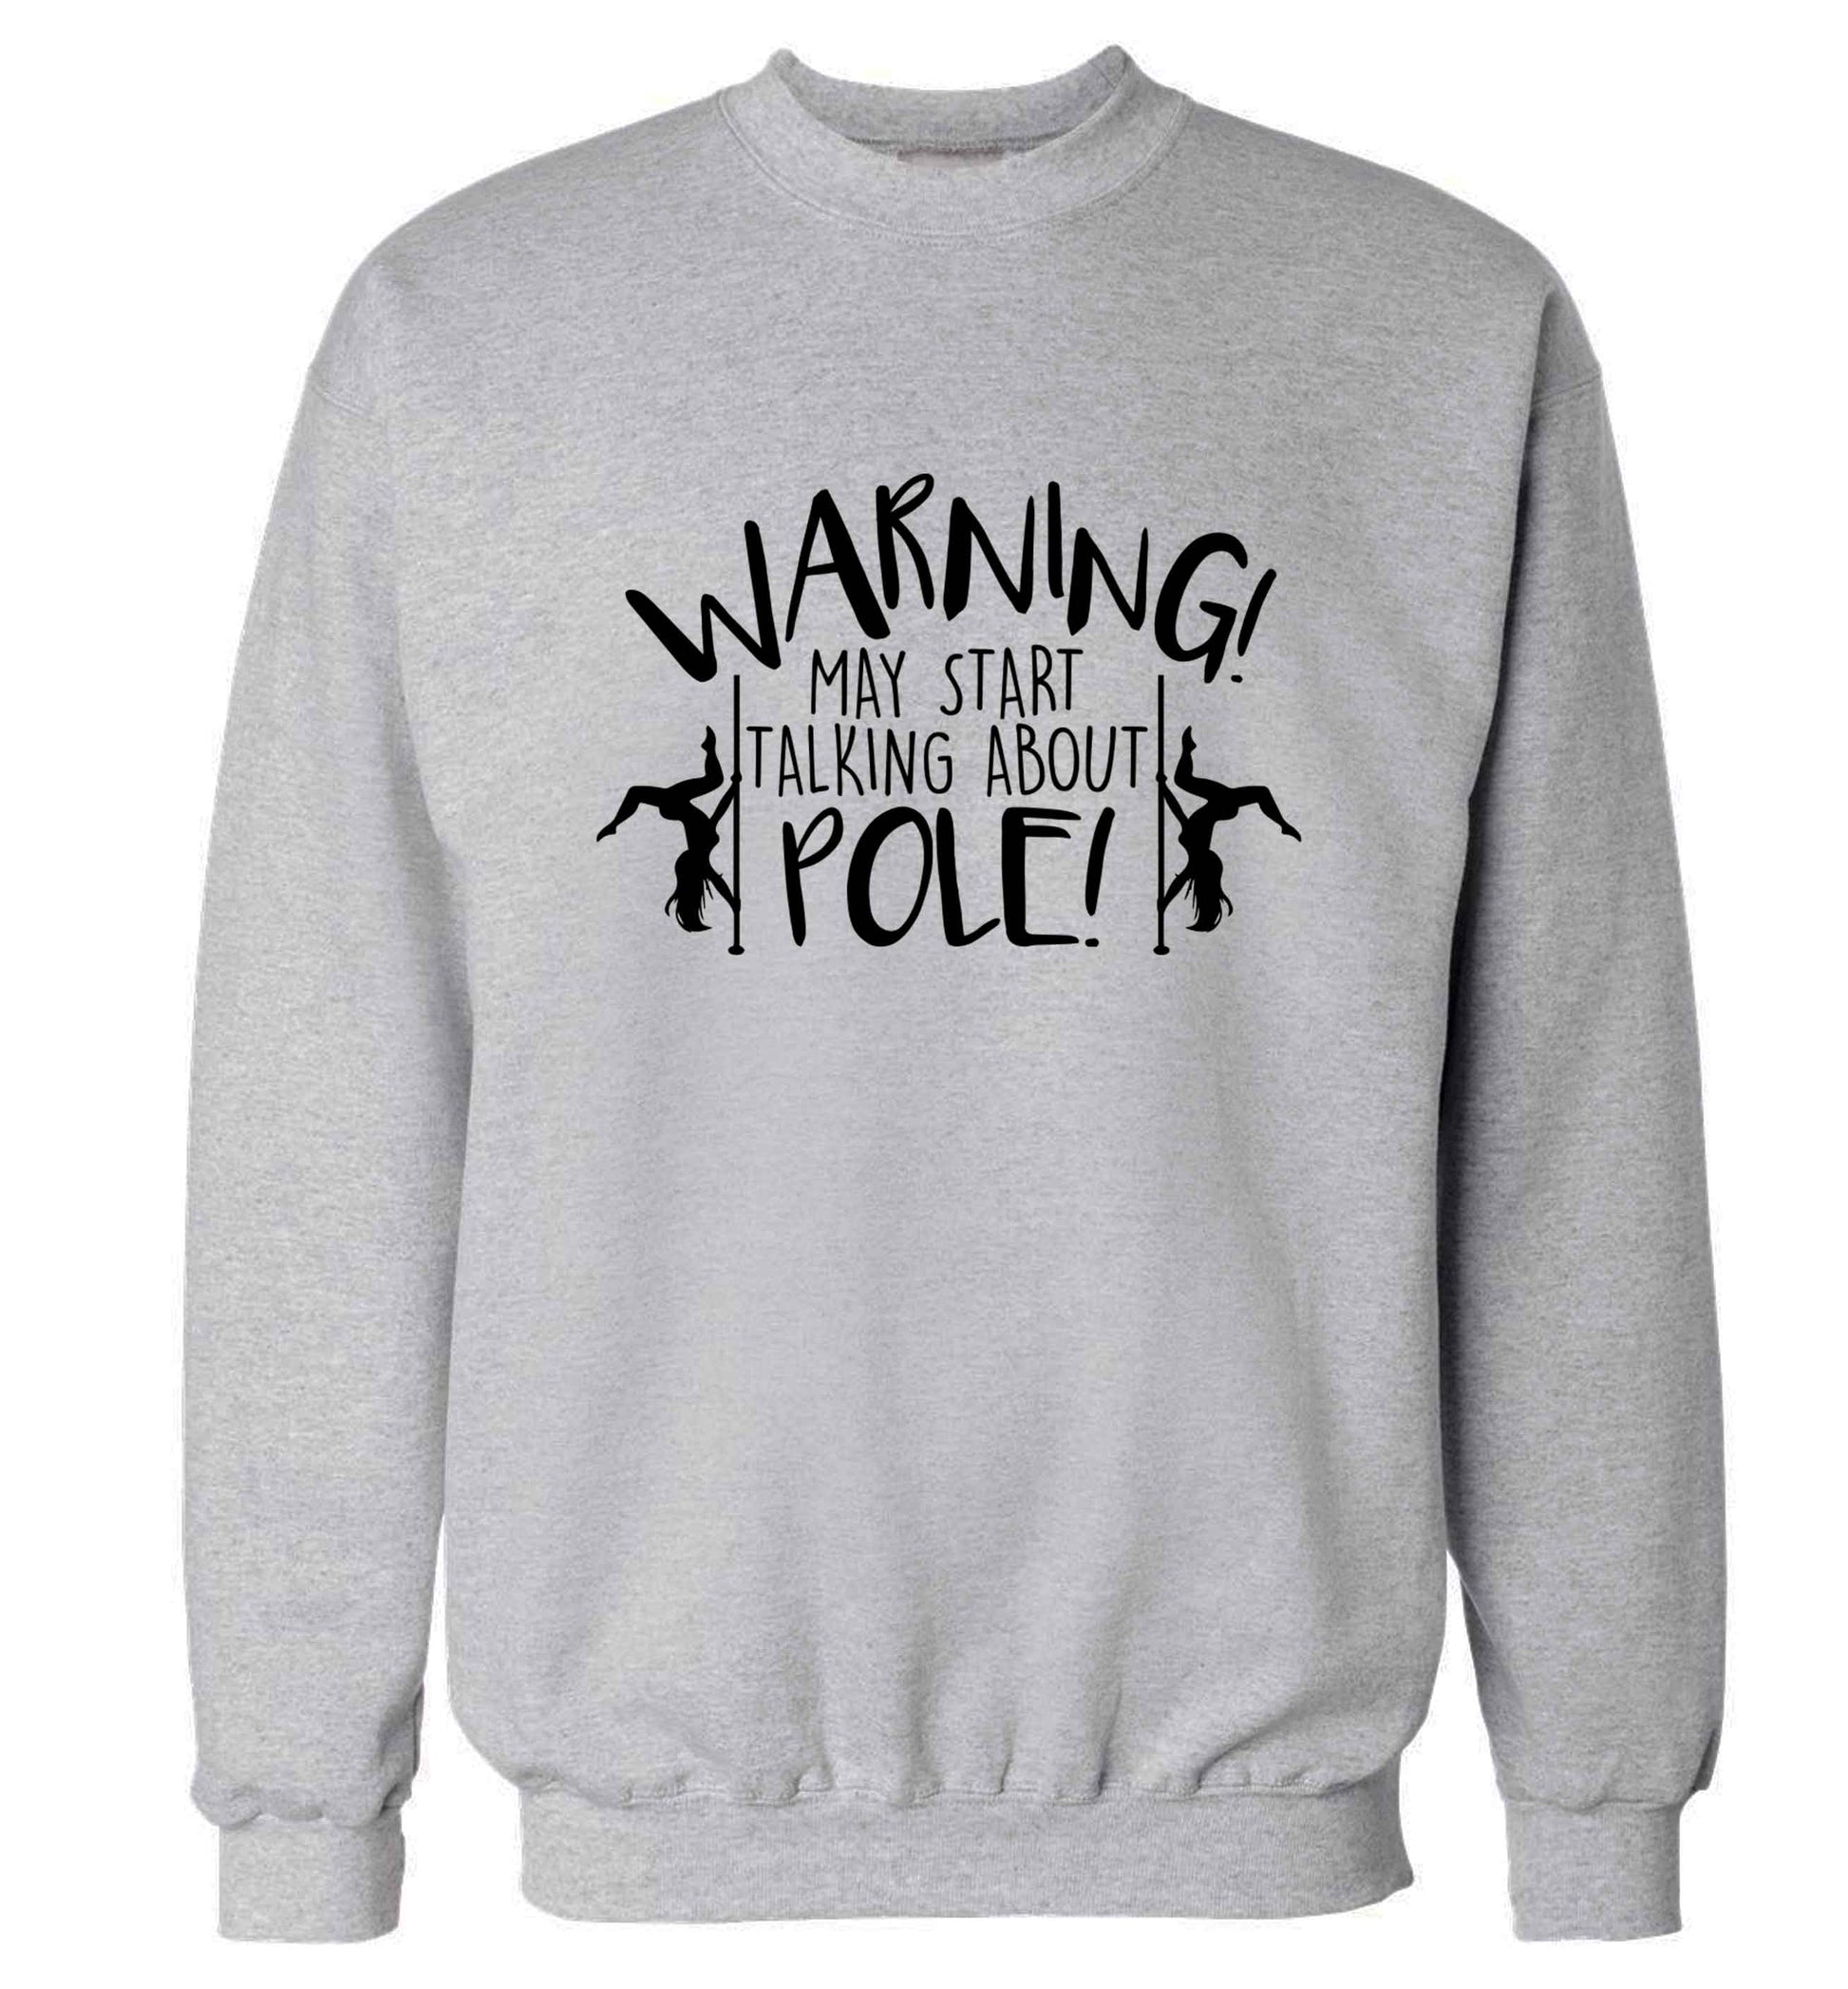 Warning may start talking about pole  adult's unisex grey sweater 2XL